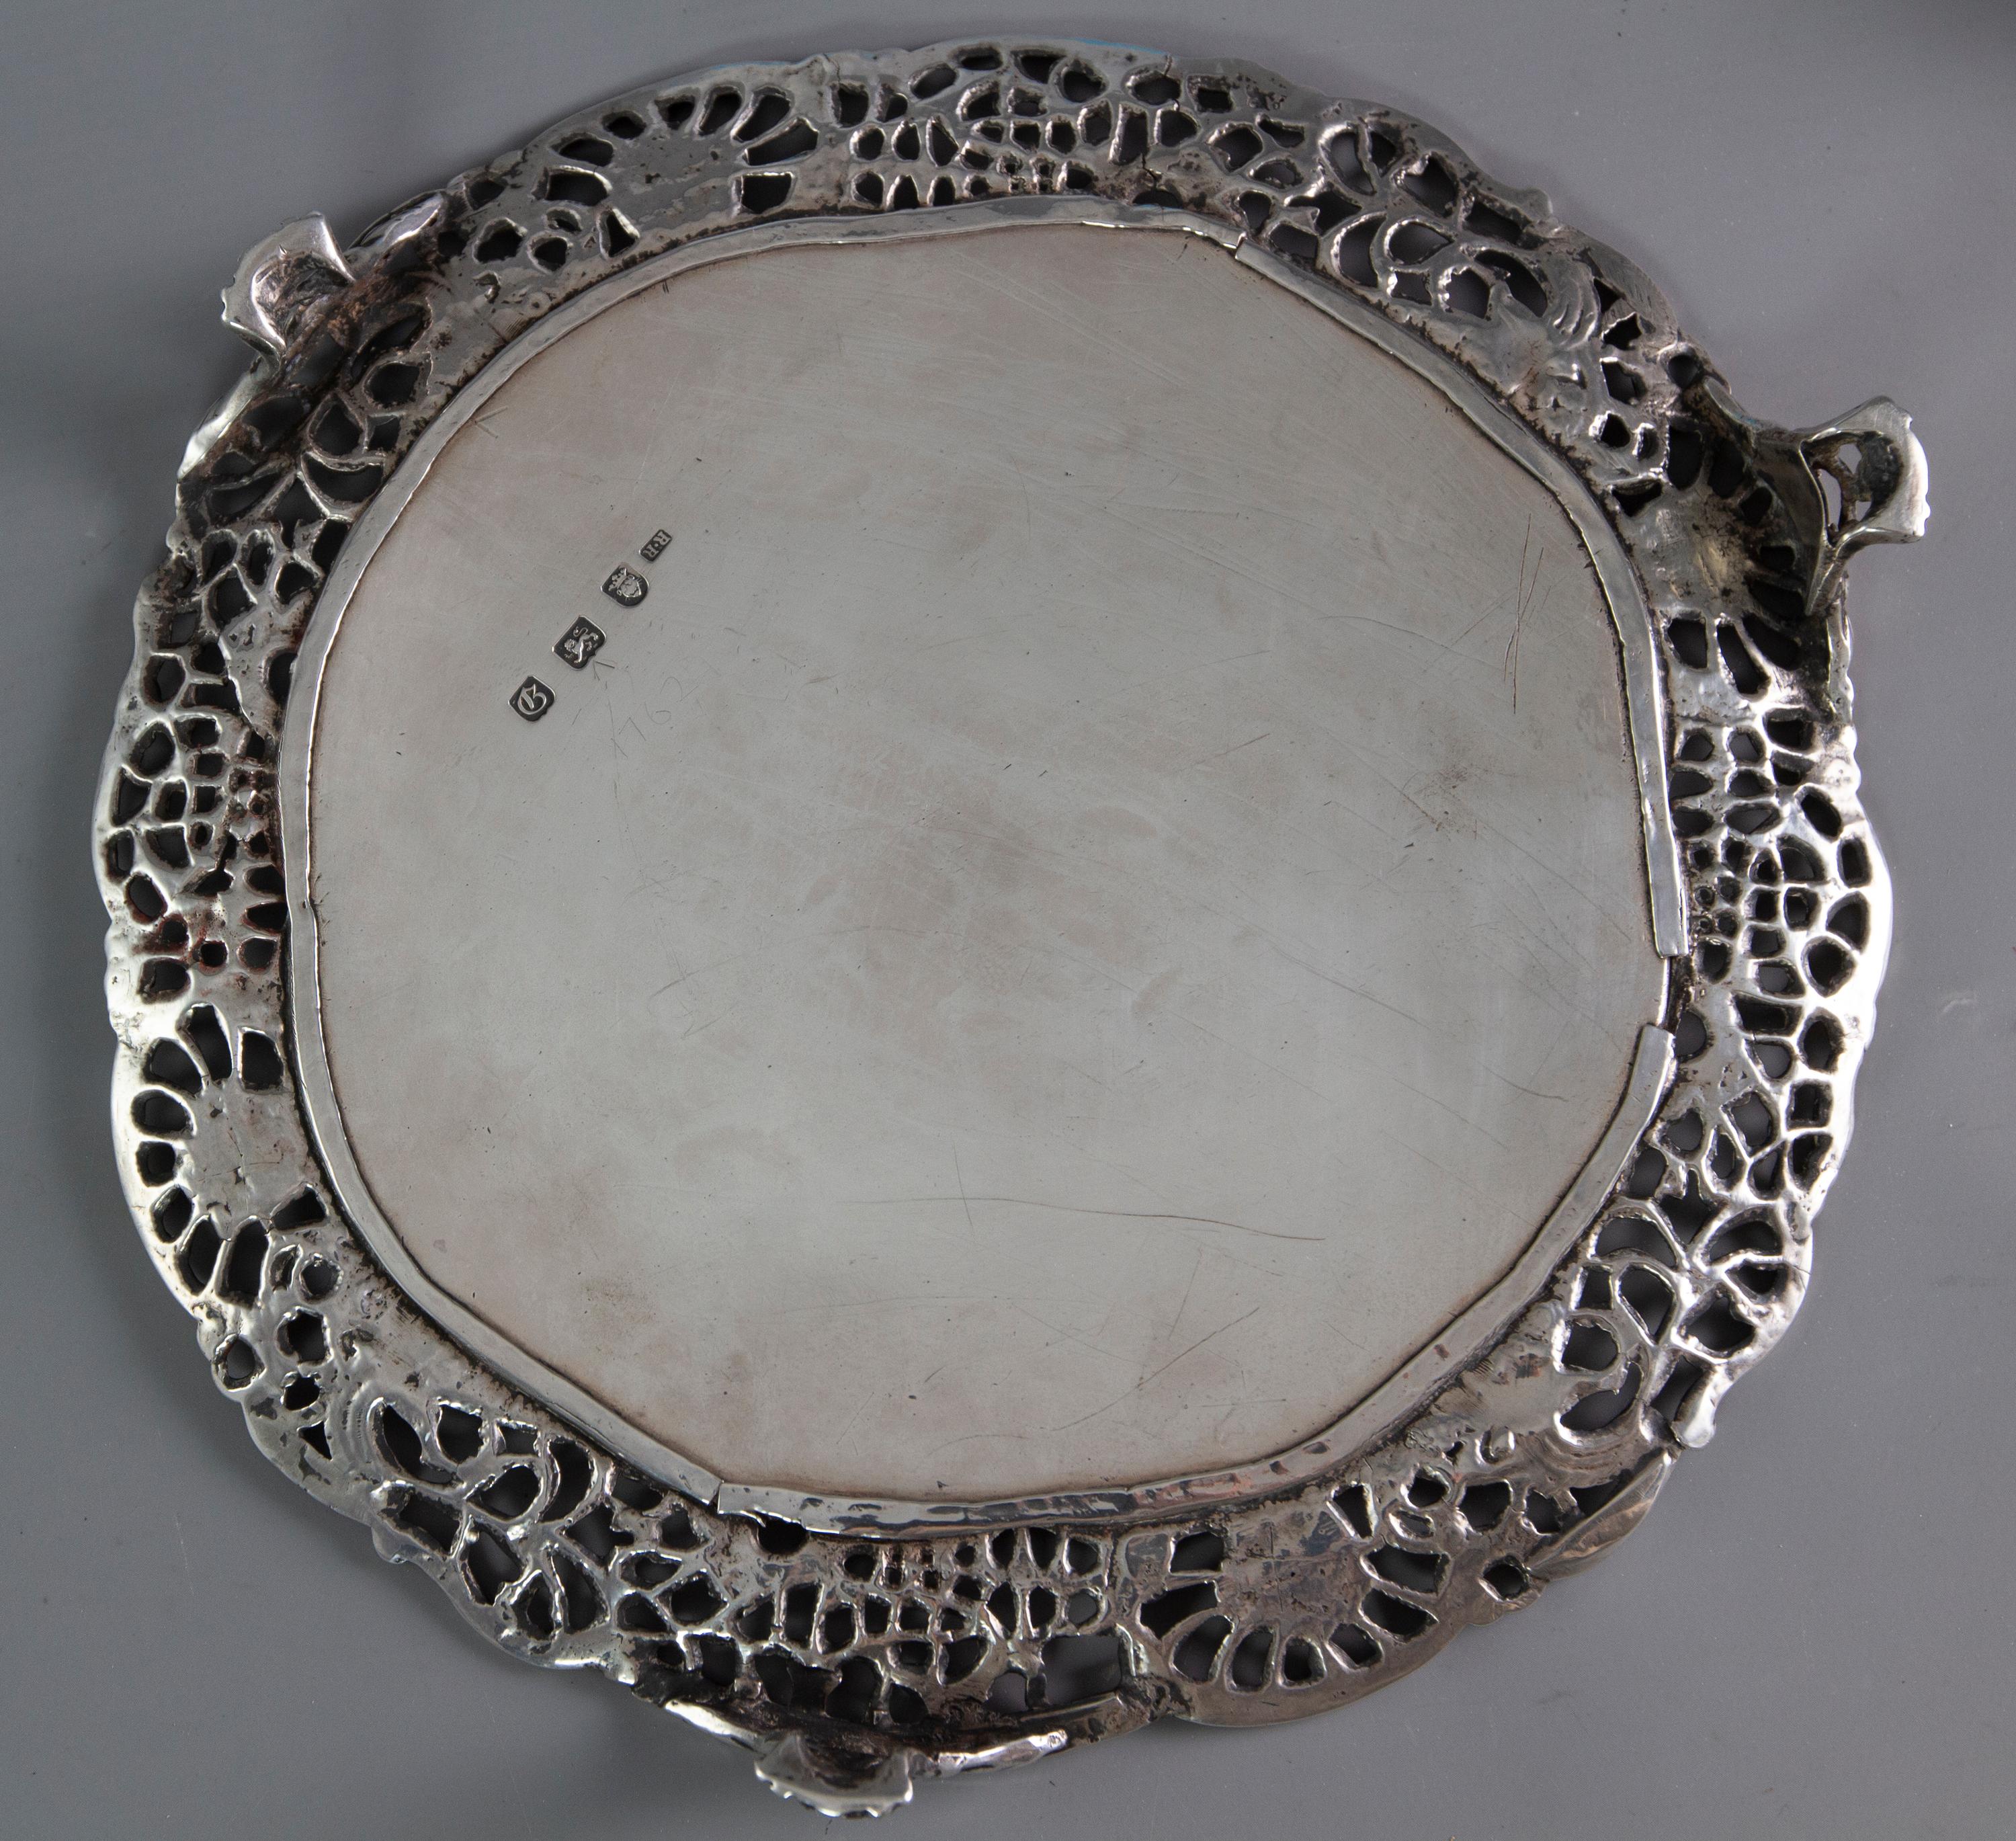 Set of 3 George III Silver Salvers or Trays, London 1762 by Richard Rugg For Sale 2